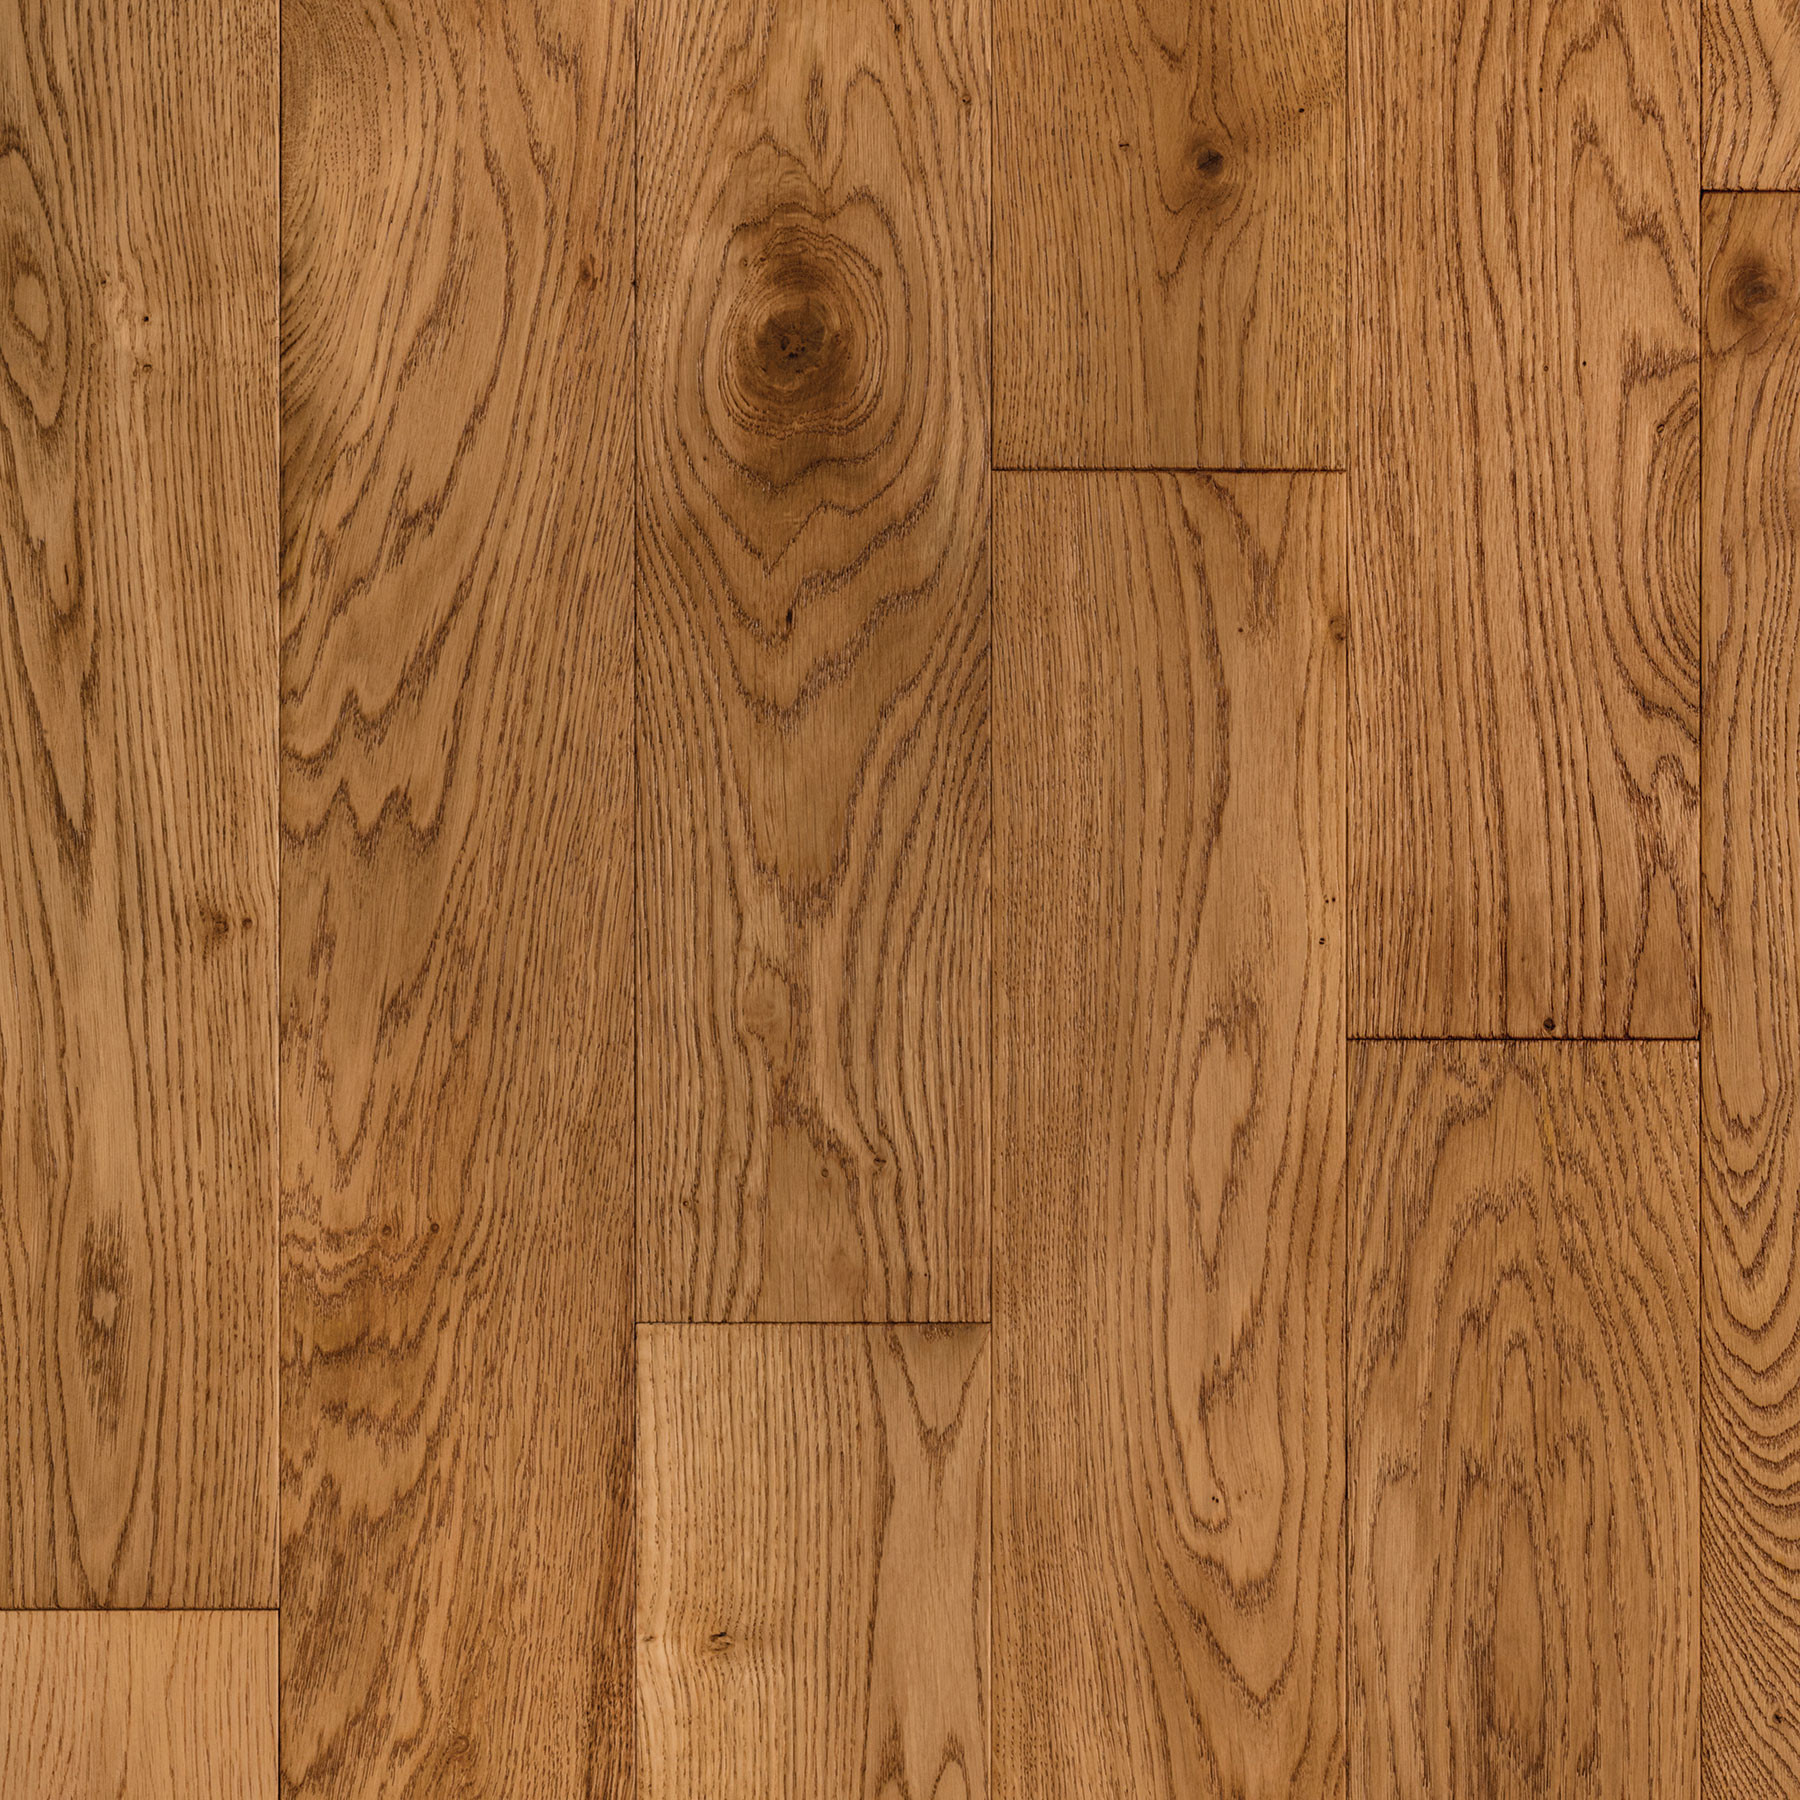 10 Awesome Hardwood Floor Stain Colors for White Oak 2024 free download hardwood floor stain colors for white oak of harbor oak 5e280b3 white oak sand etx surfaces within harbor oak 5e280b3 white oak sand